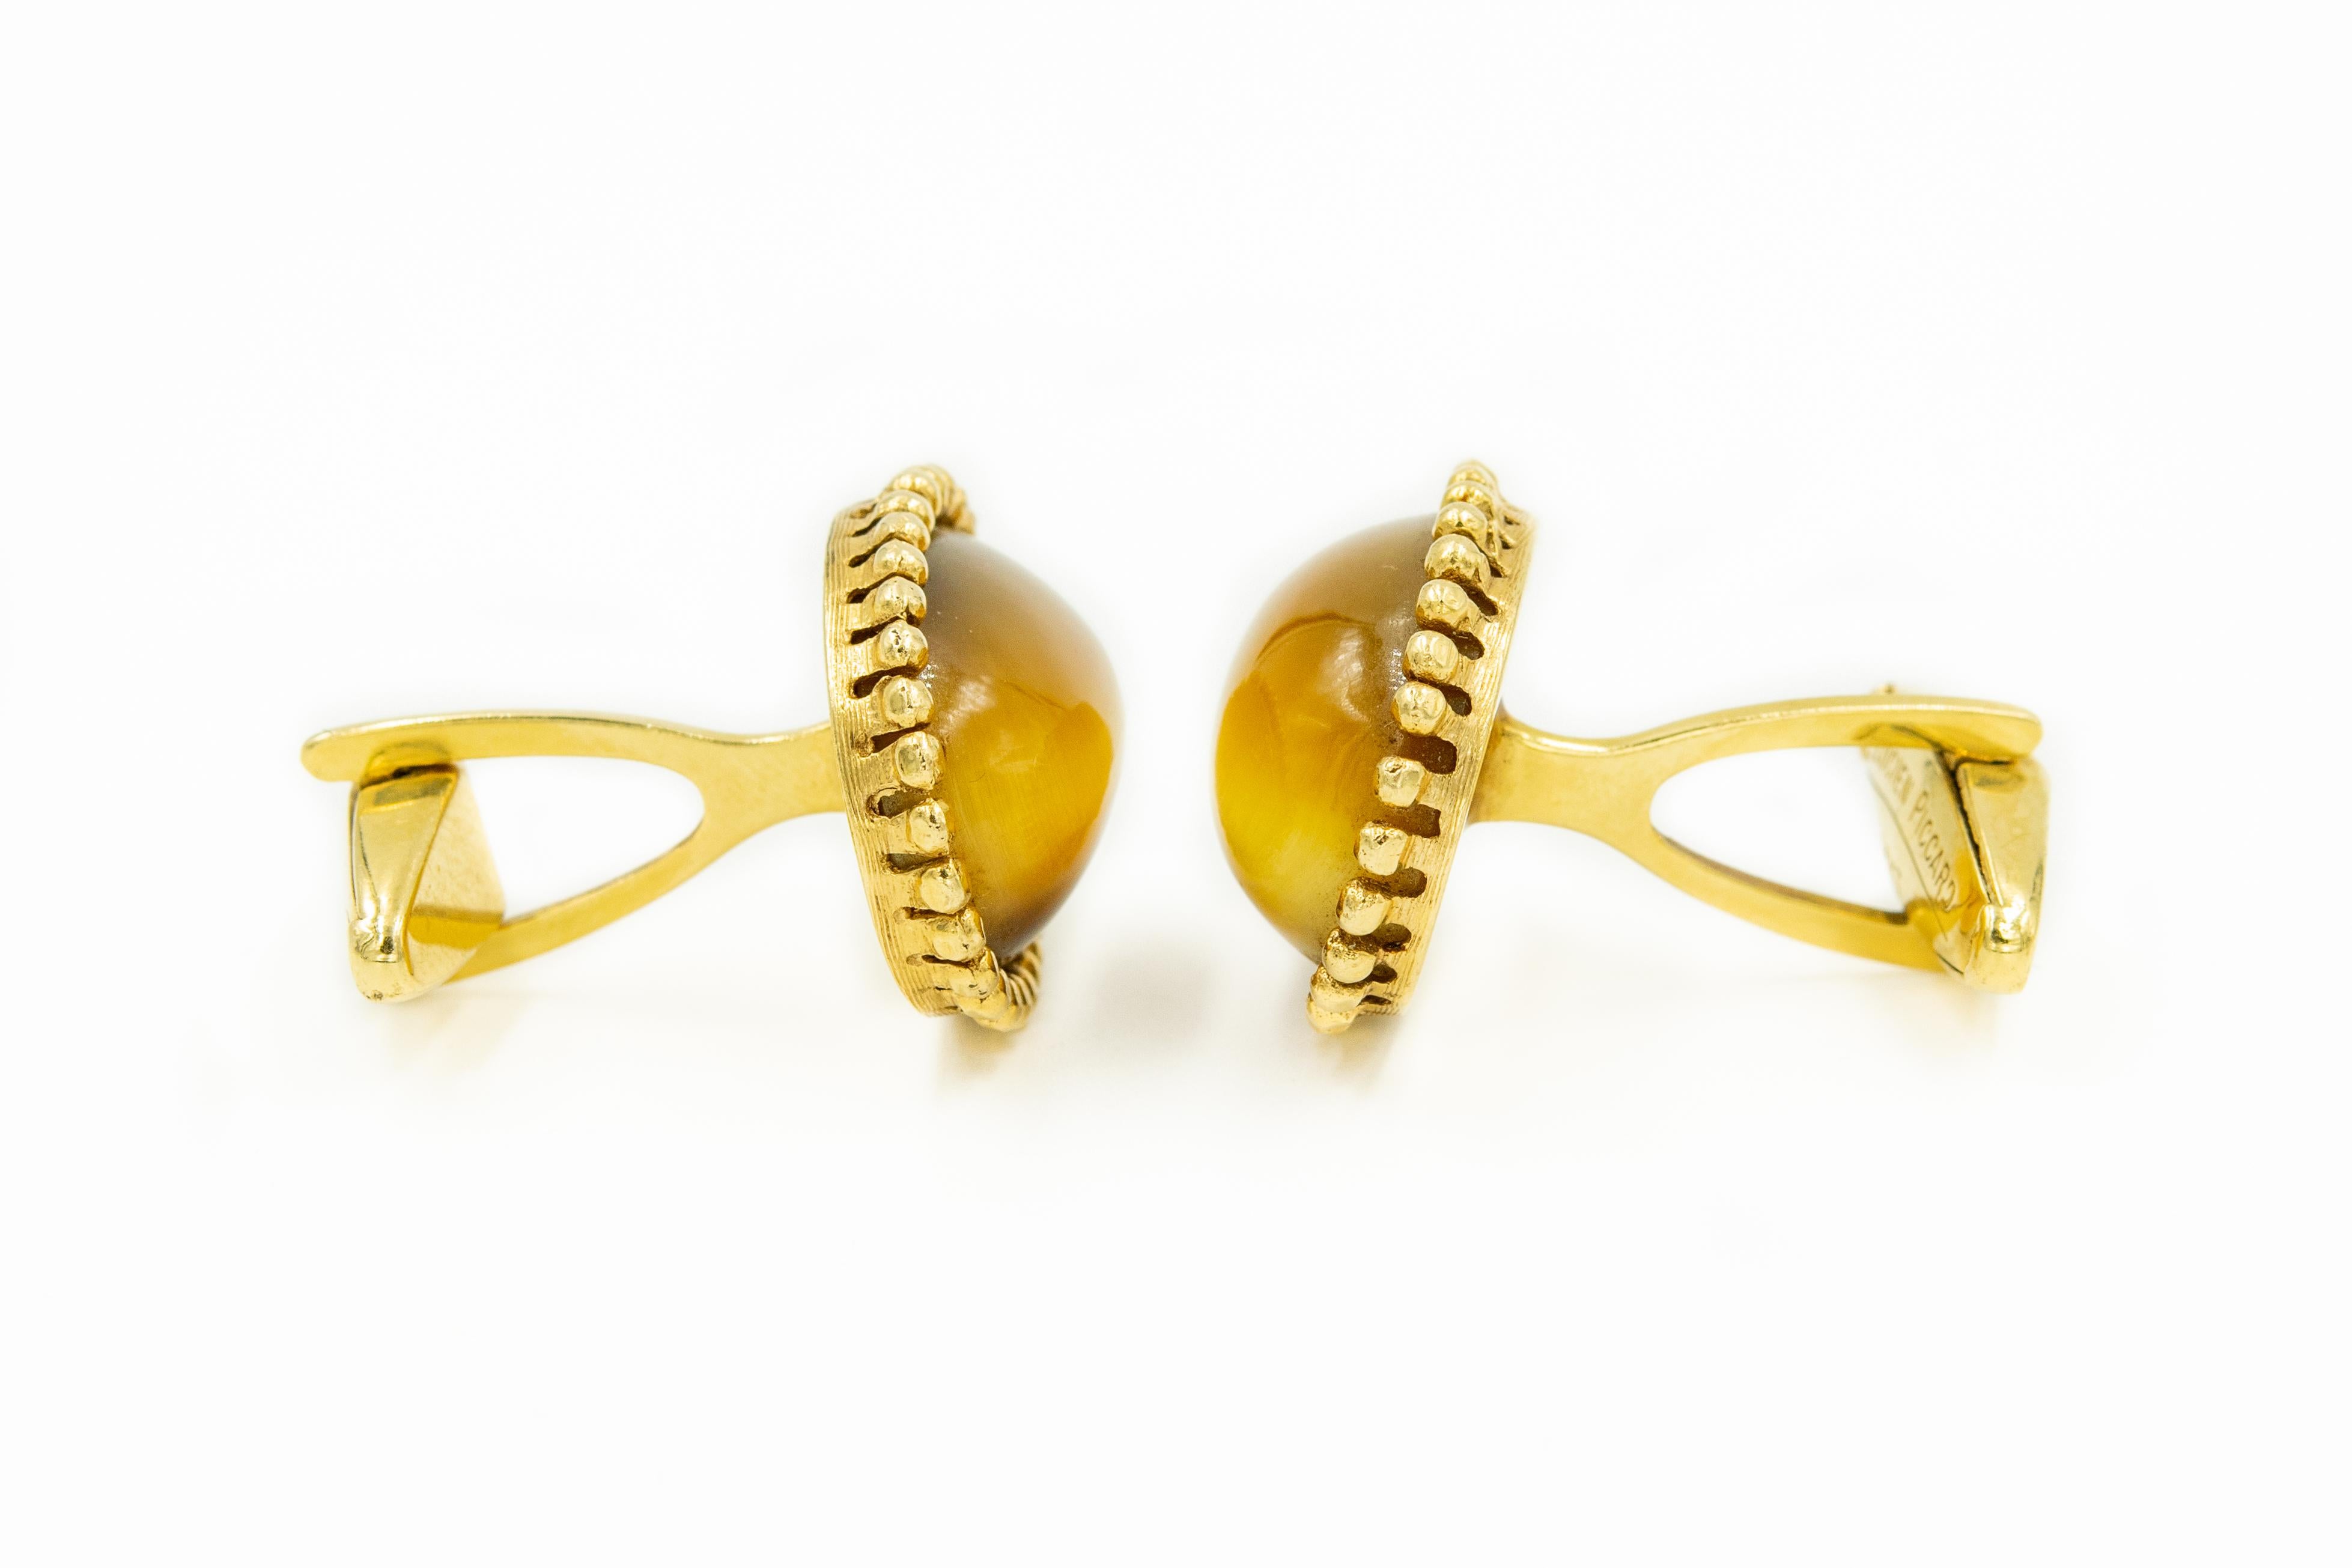 Mid 20th century Lucien Piccard  14K yellow gold cufflinks featuring oval tiger's eye quartz cabochons in beaded gold frame and toggle closures. 

Full depth including toggle is 1.04